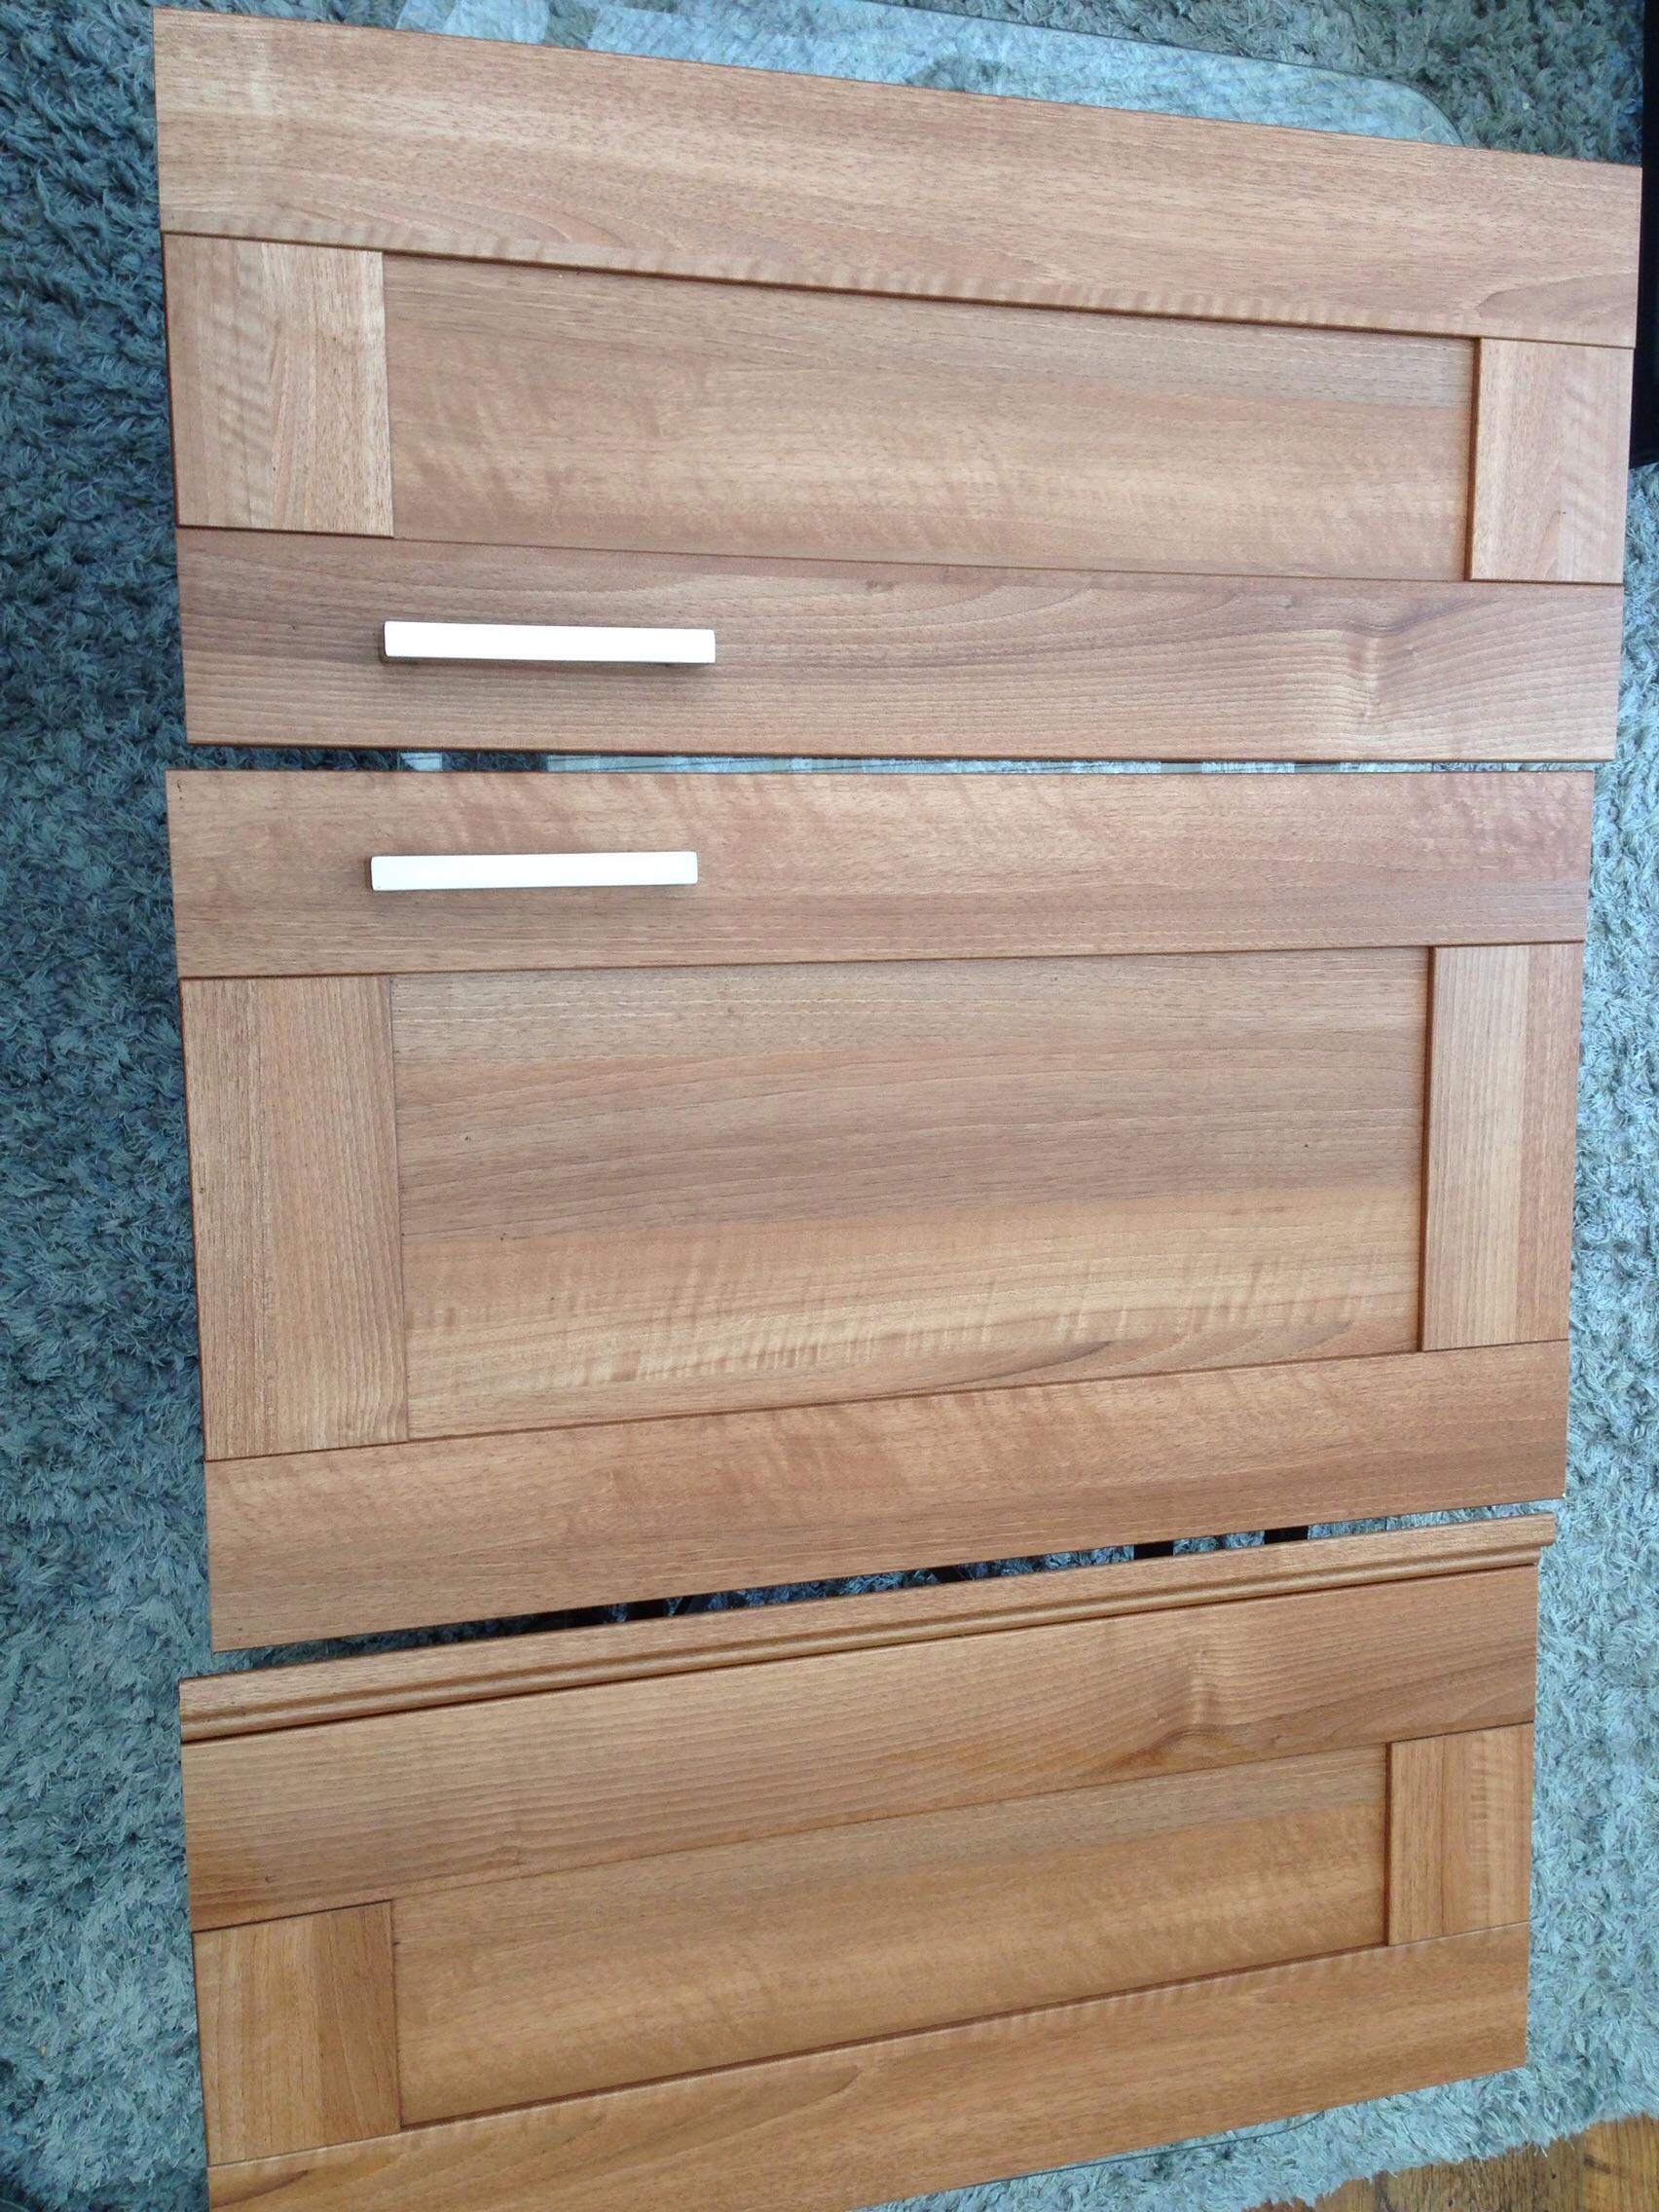 B Q Walnut Effect Kitchen Cabinet Doors X4 In B45 Rubery For 20 00 For Sale Shpock